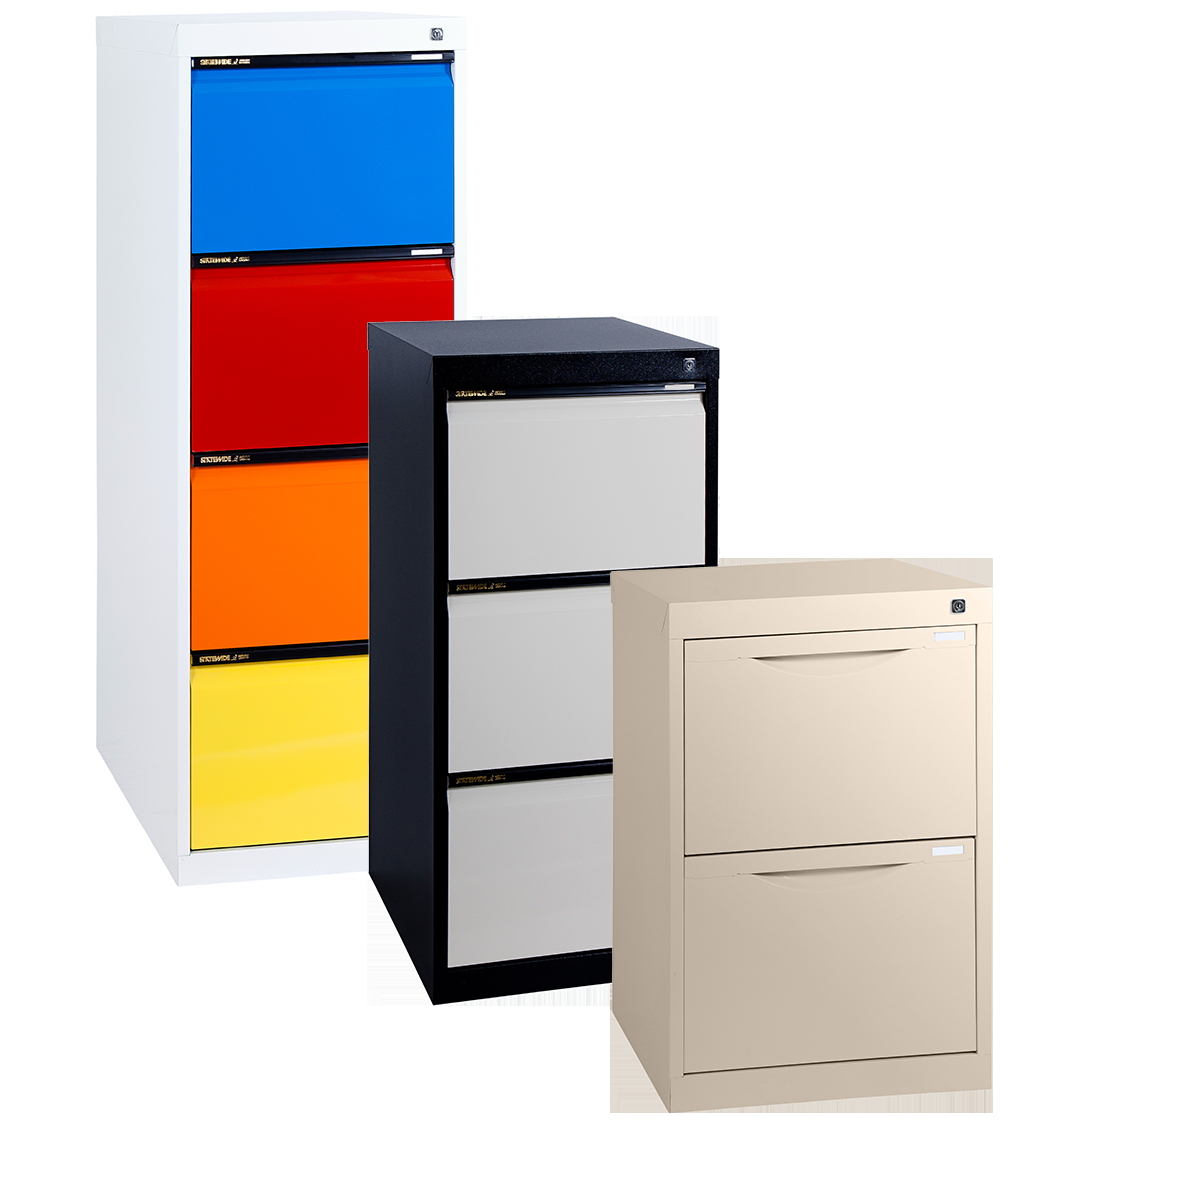  Lateral  Vs  Vertical  File  Cabinets  Cabinet  Ideas